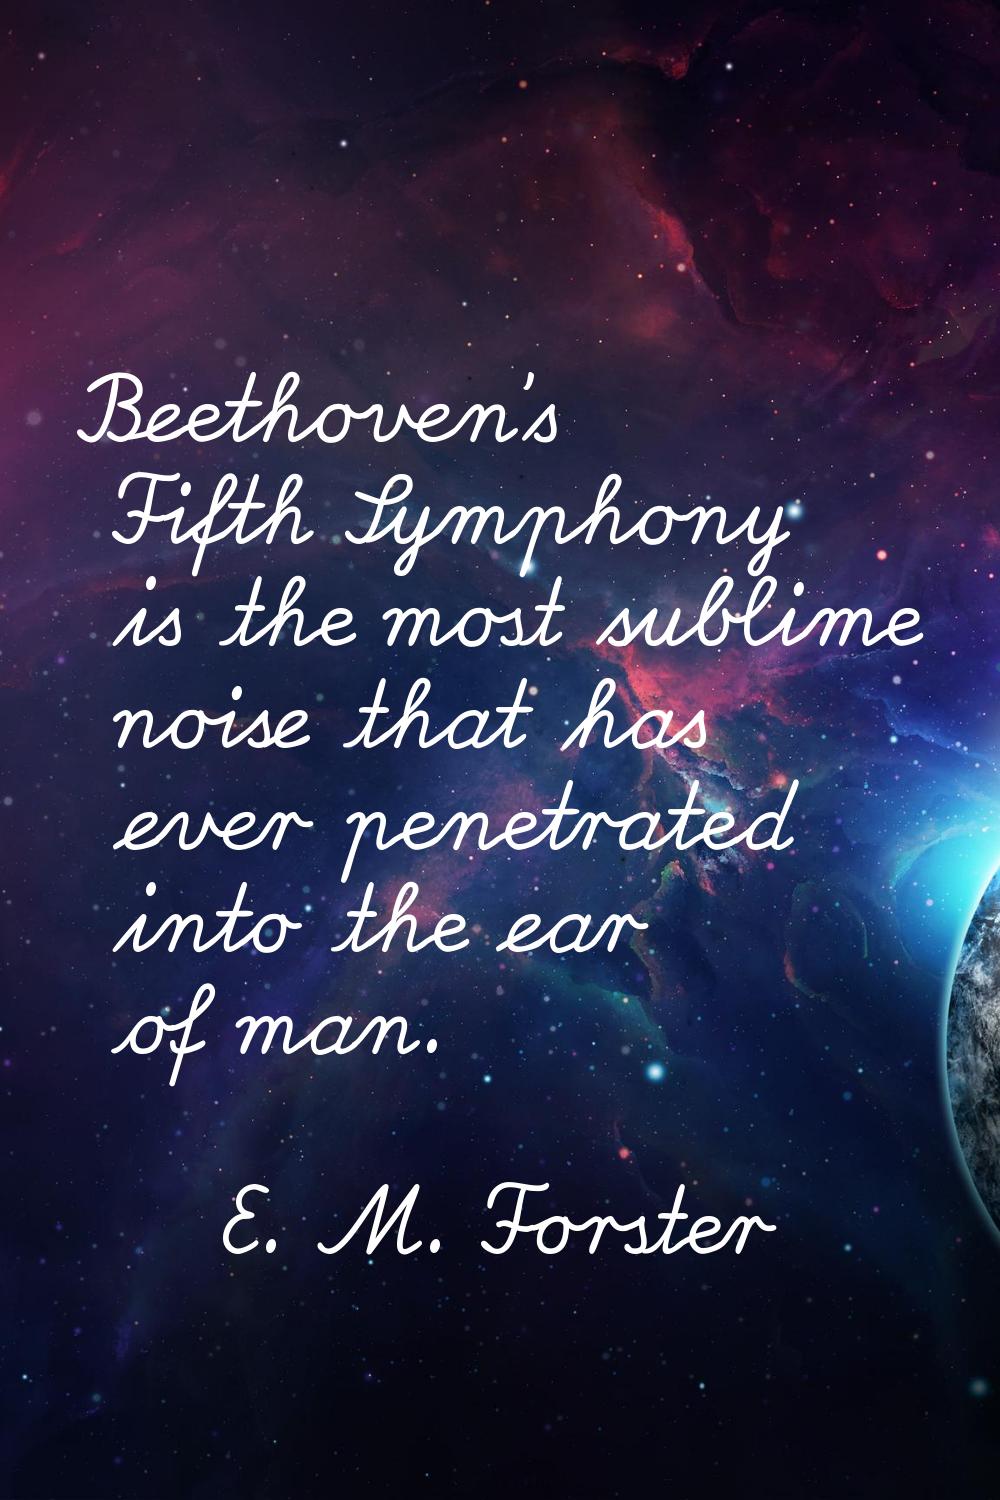 Beethoven's Fifth Symphony is the most sublime noise that has ever penetrated into the ear of man.